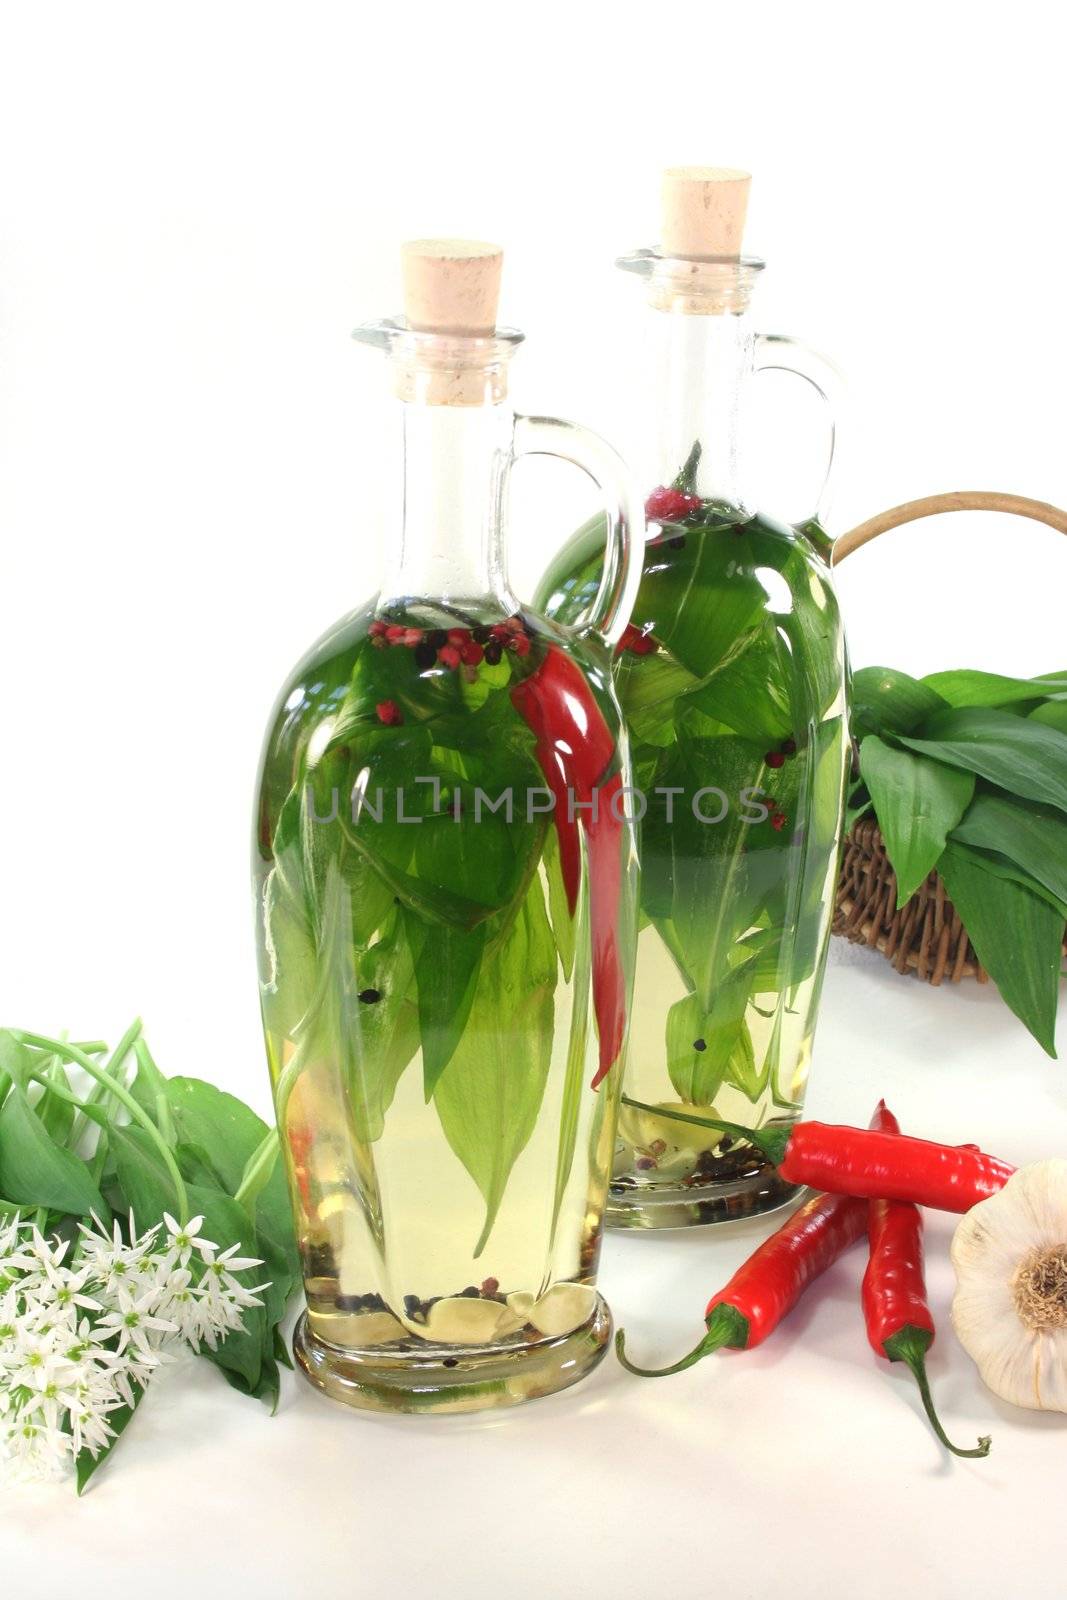 two bottles of Wild garlic oil with leaves and flowers on a white background